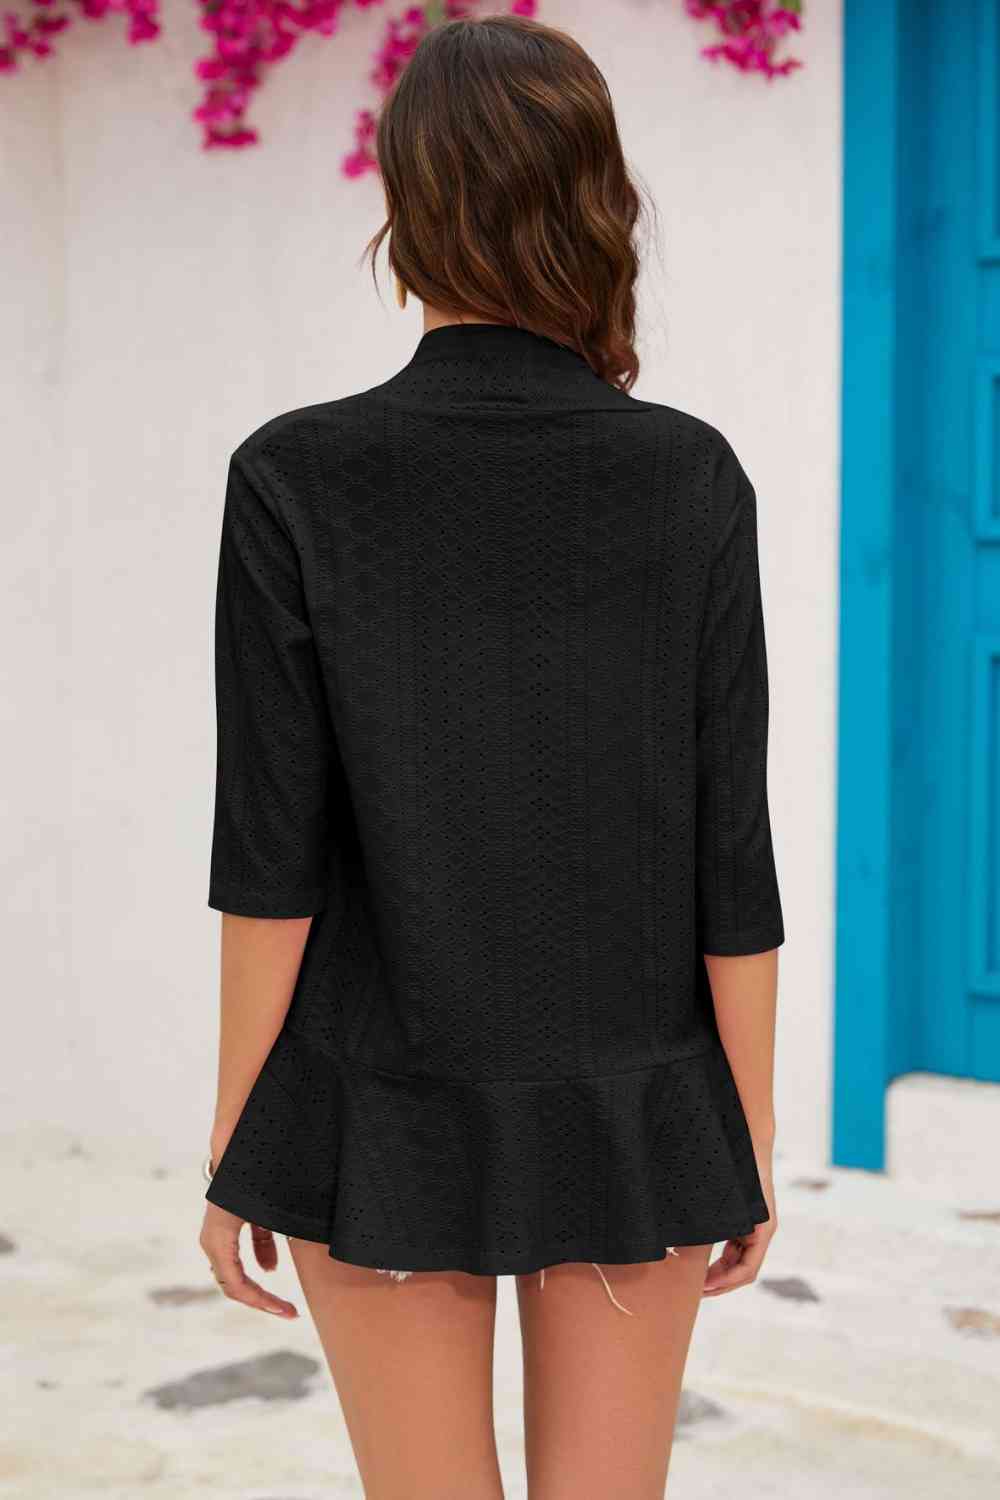 A Half Sleeve Open Front Cardigan